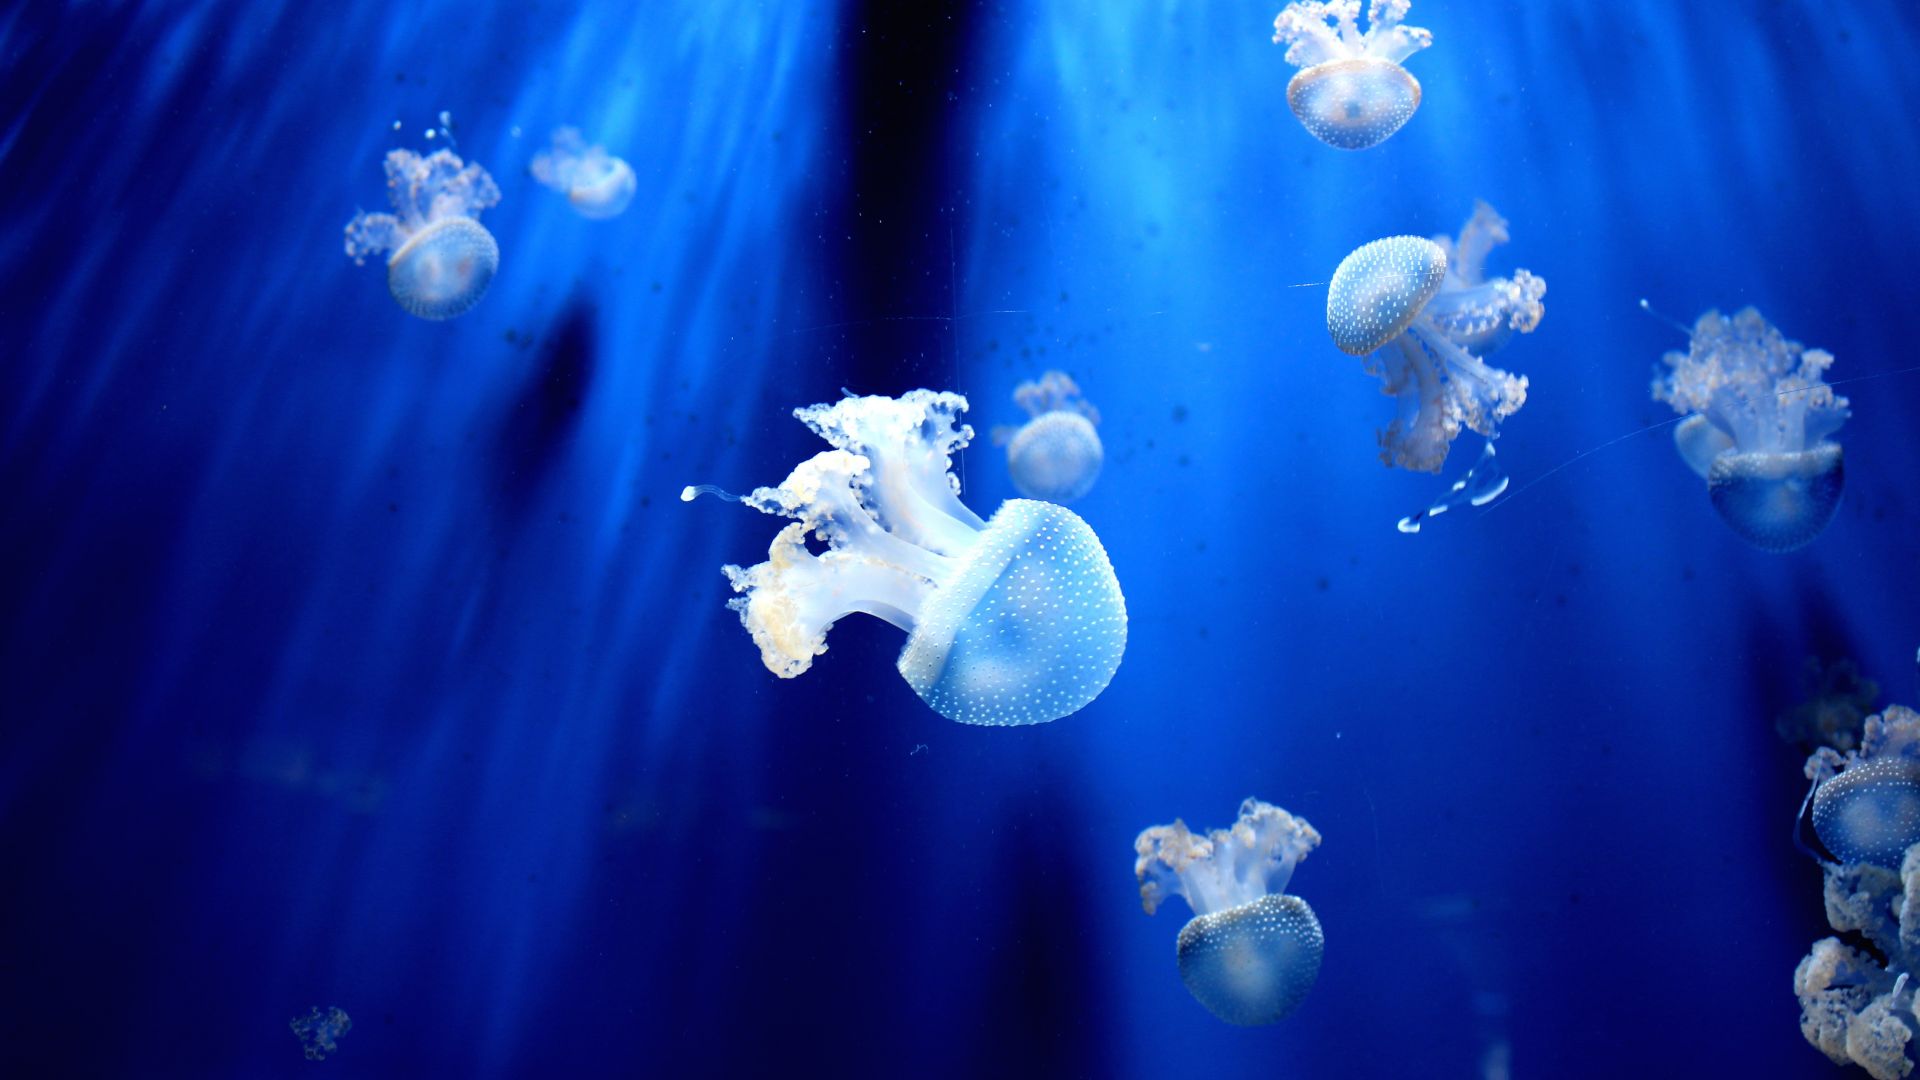 Desktop Wallpaper Small Jelly Fishes, Underwater, Hd Image, Picture,  Background, Lr Tnp